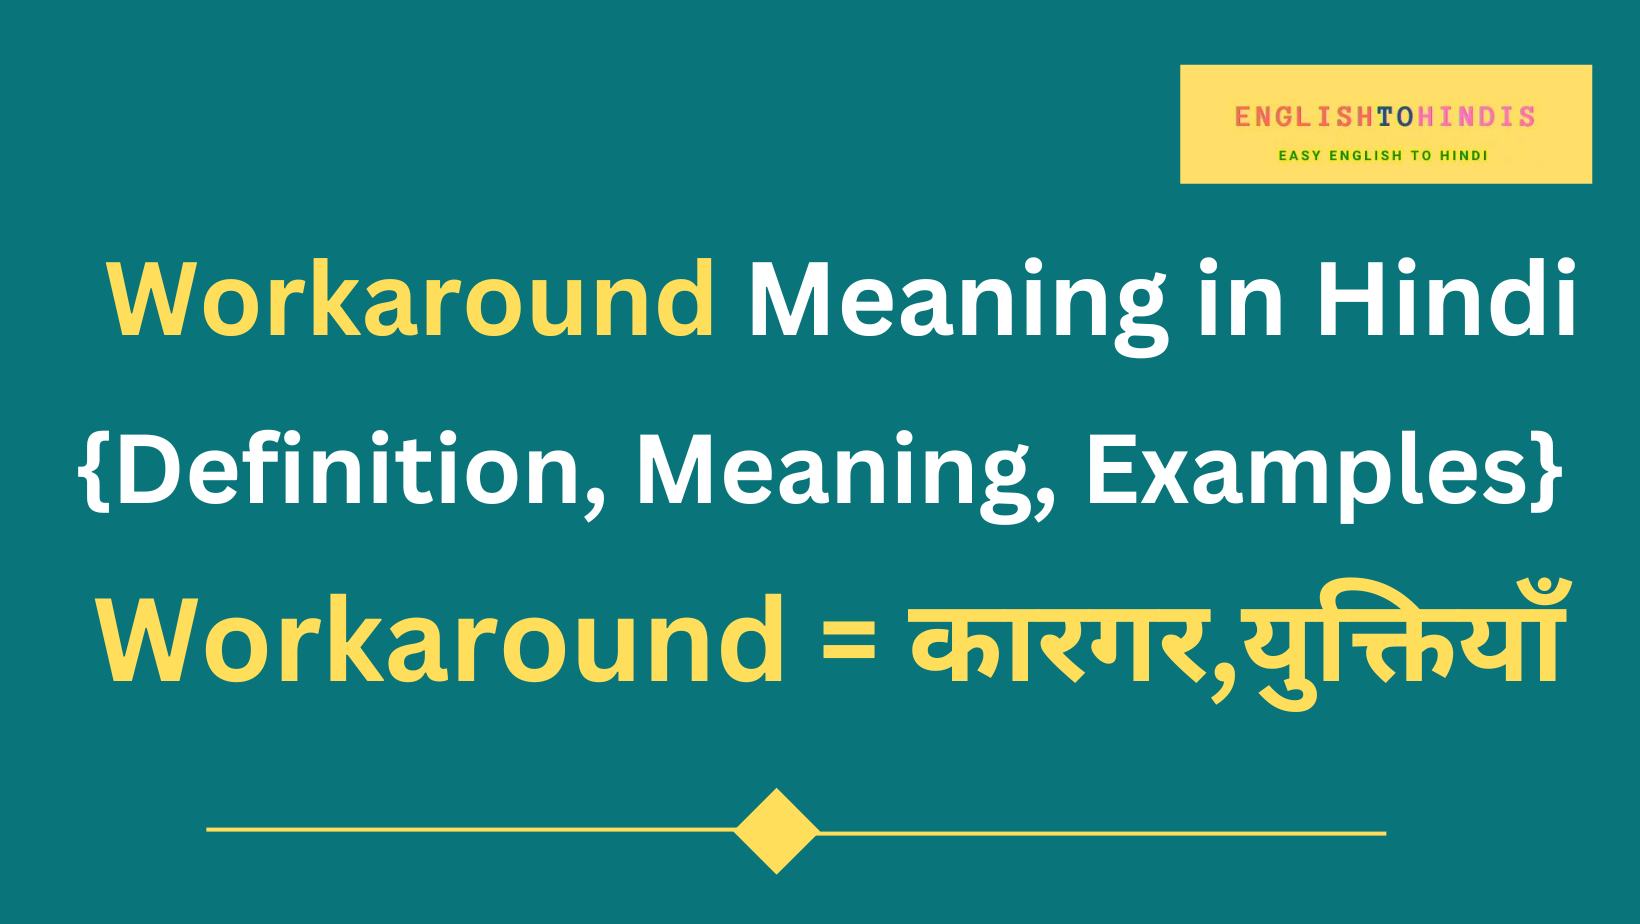 Workaround Meaning in Hindi